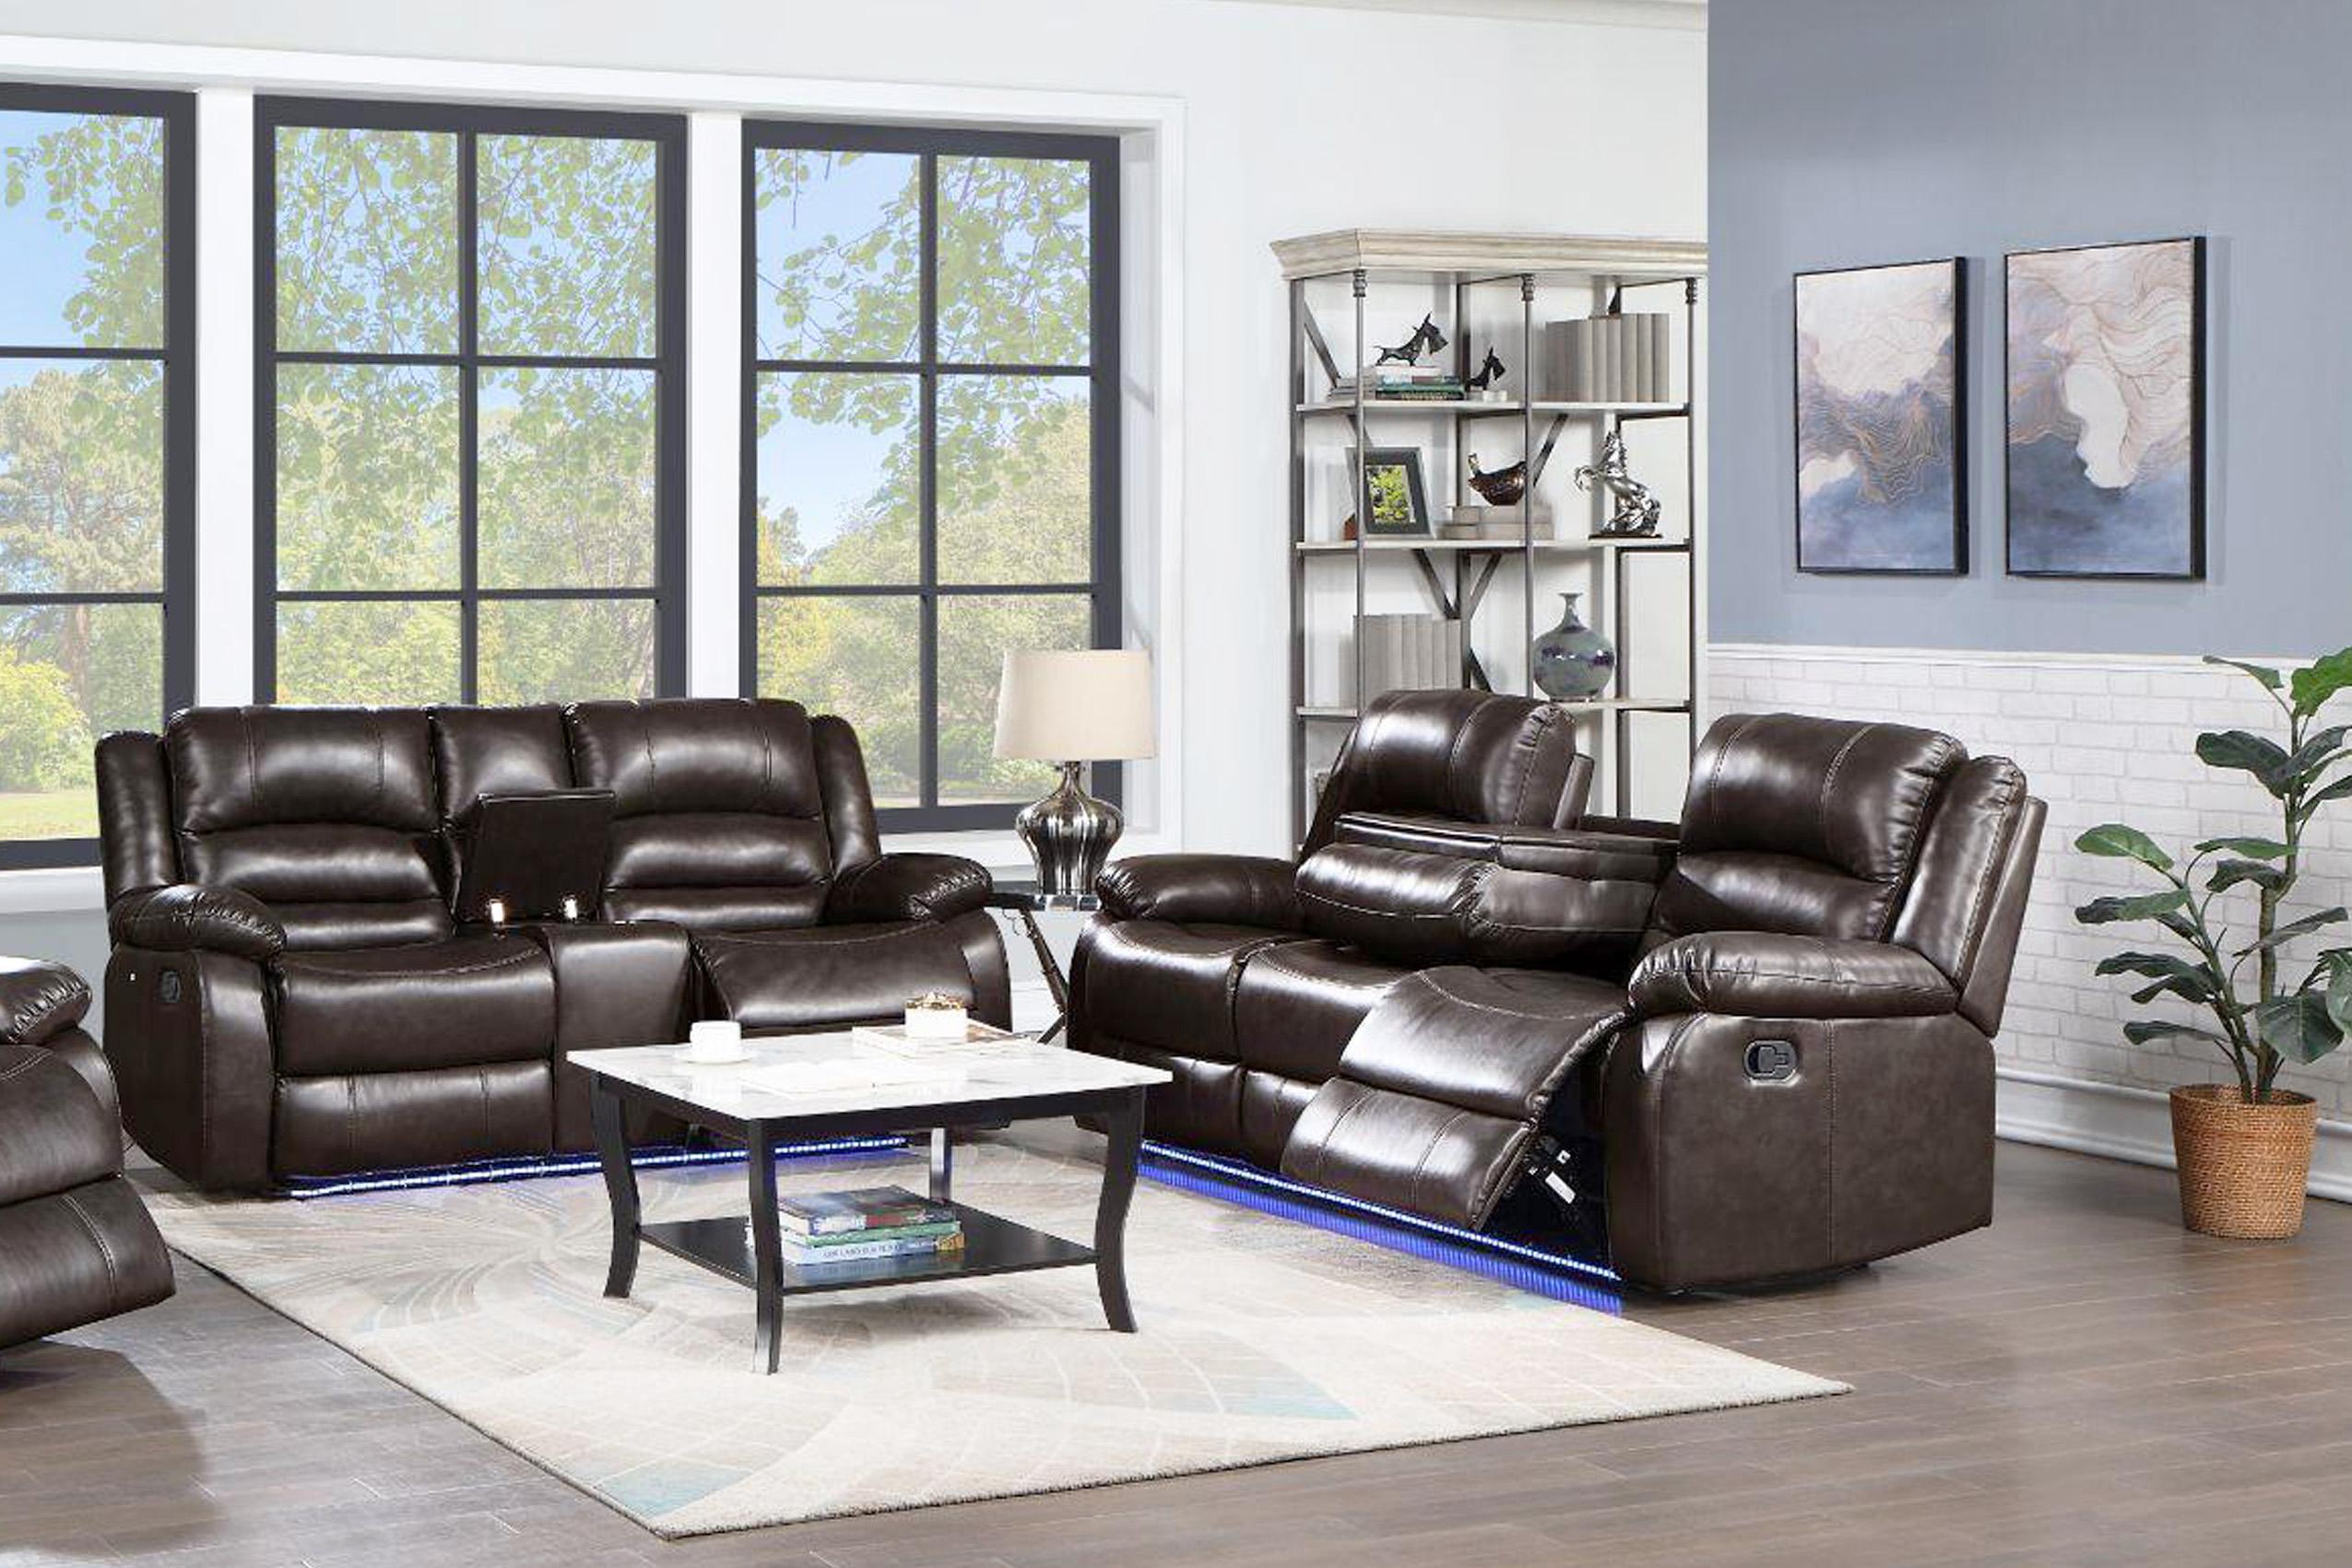 Contemporary, Modern Recliner Sofa Set MARTIN BR MARTIN-BR-S-L in Brown Faux Leather